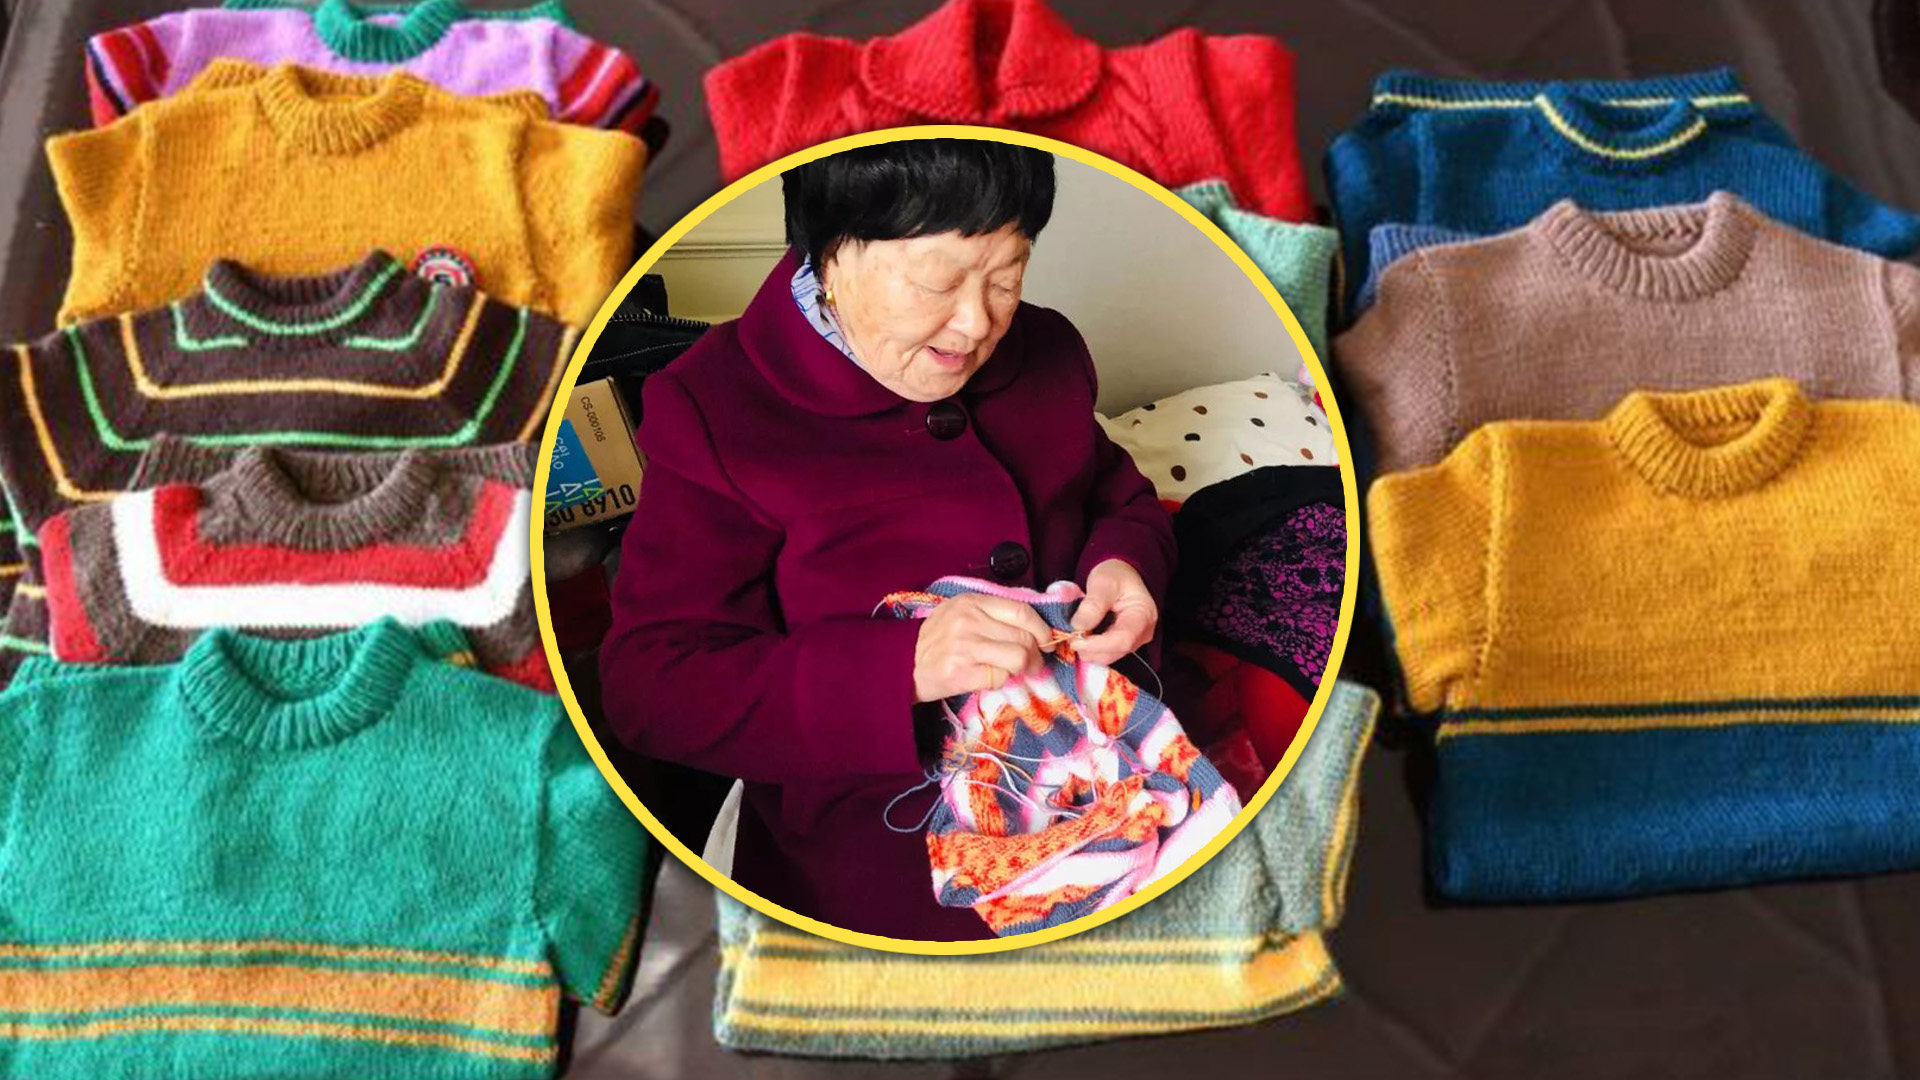 The story of an 84-year-old woman in China, who has knitted thousands of warm jumpers for the country’s poverty-stricken children, has captivated mainland social media. Photo: SCMP composite/Shutterstock